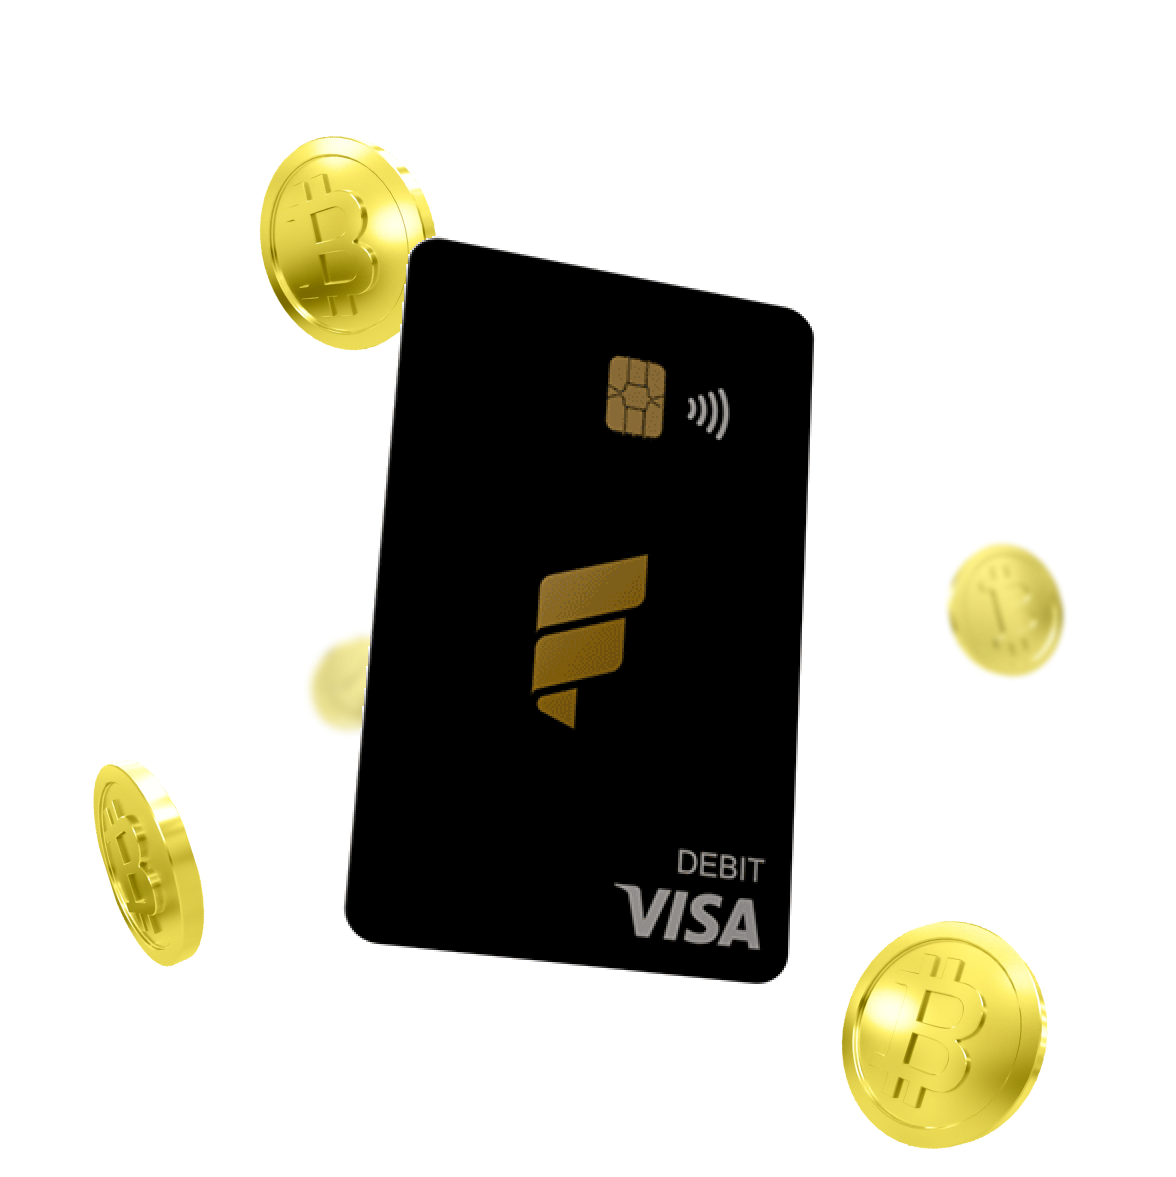 Buy Virtual Credit Cards with Bitcoin: Secure Transactions Made Simple